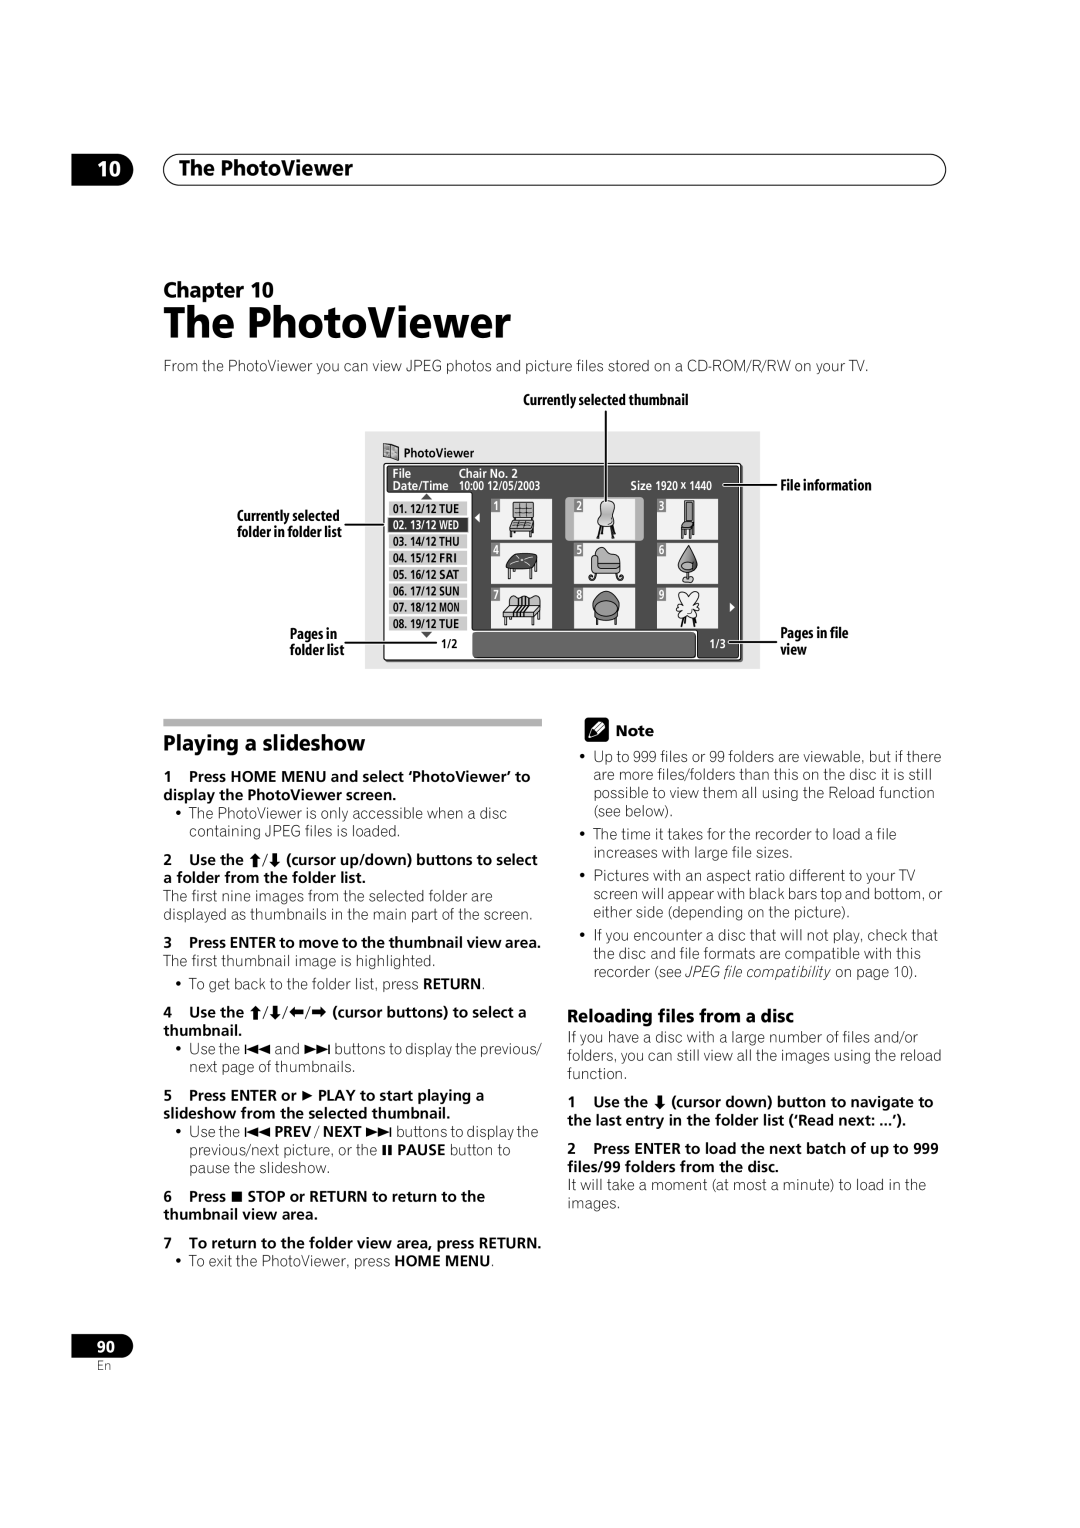 Pioneer DVR-720H, DVR-520H manual The PhotoViewer Chapter, Playing a slideshow, Reloading files from a disc 